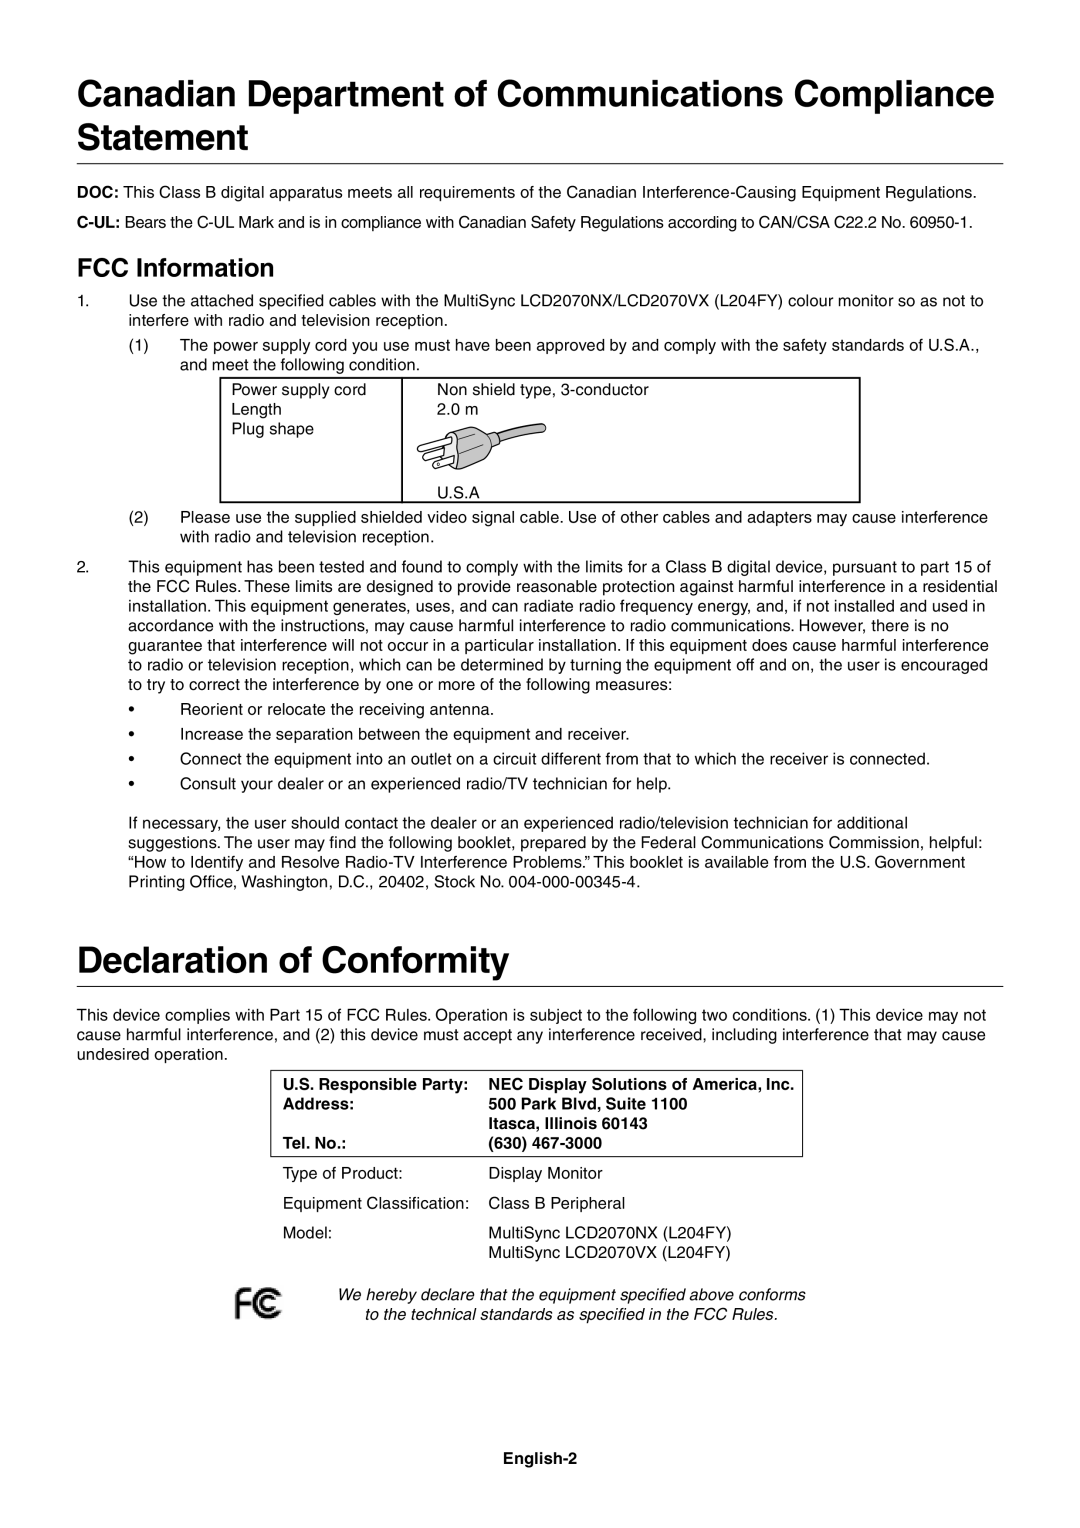 NEC LCD2070NX Canadian Department of Communications Compliance Statement, Declaration of Conformity, FCC Information 